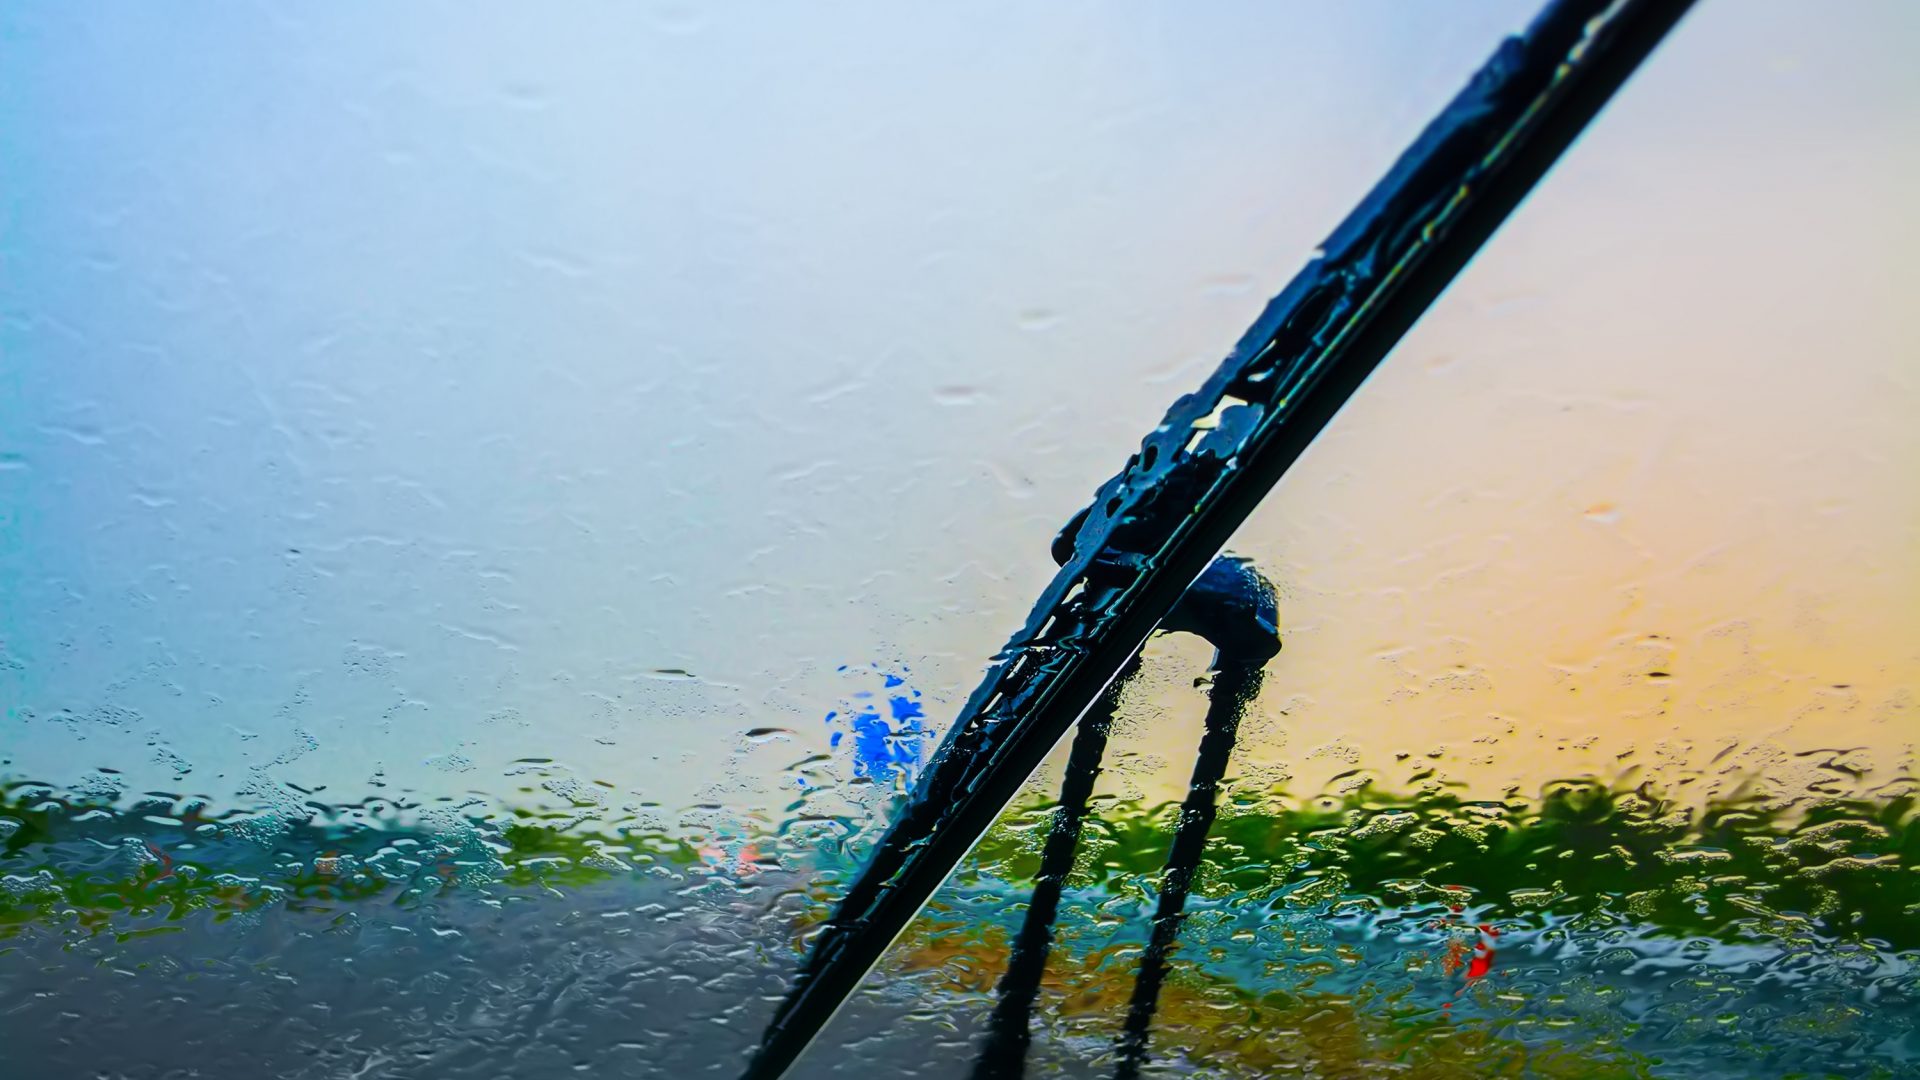 Wiper on a wet windshield at sunset